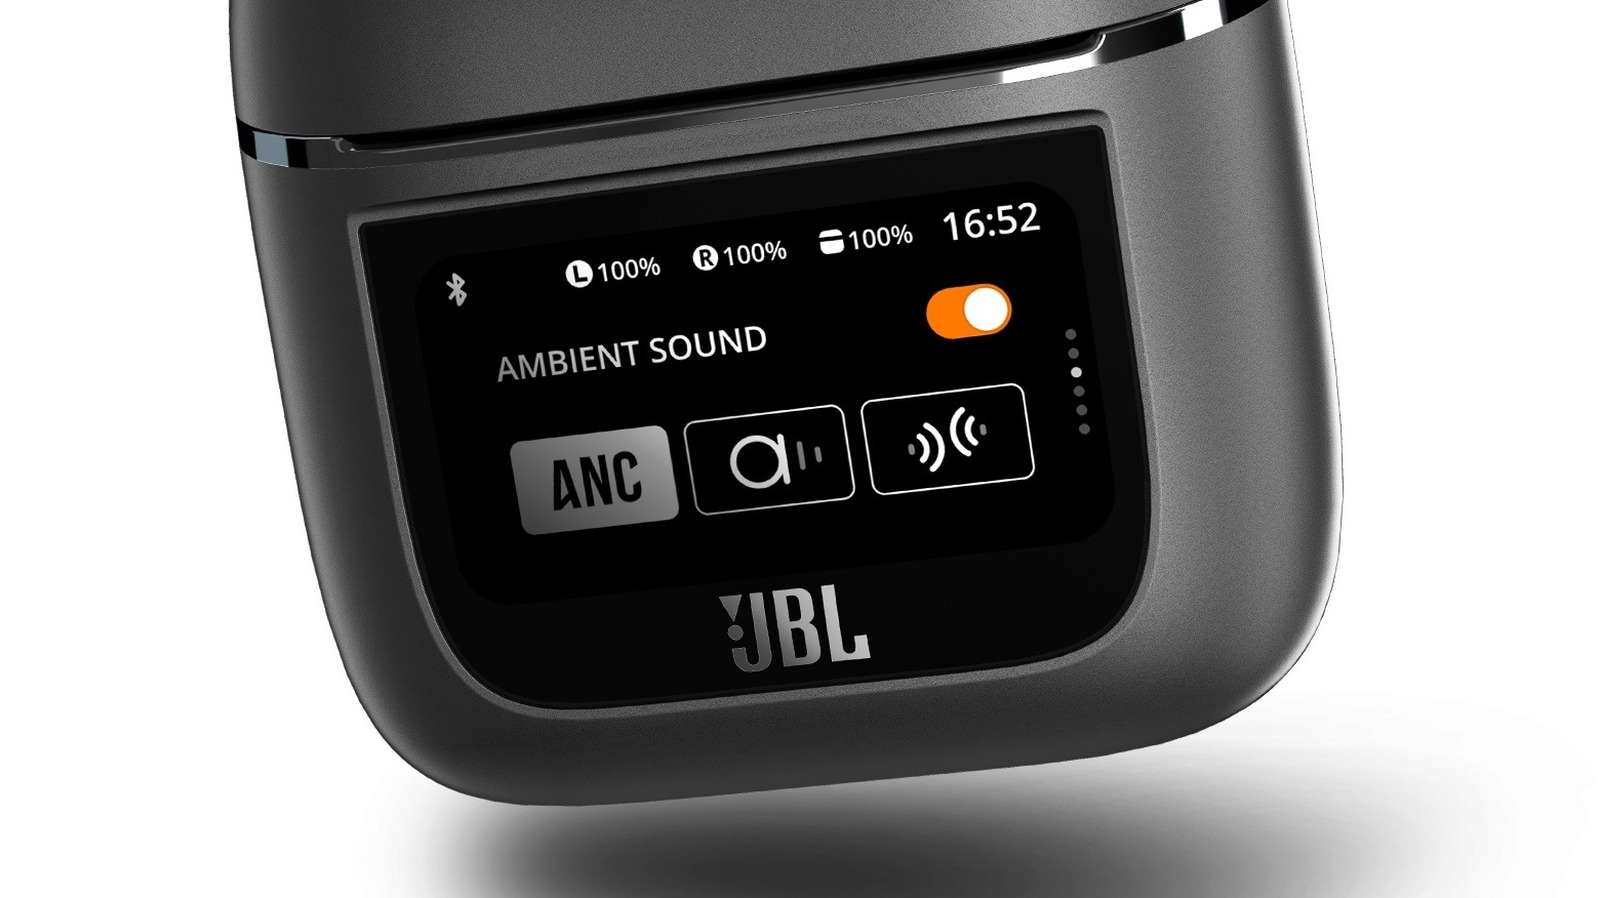 jbl-made-a-touchscreen-earbuds-case-for-its-new-airpods-rival